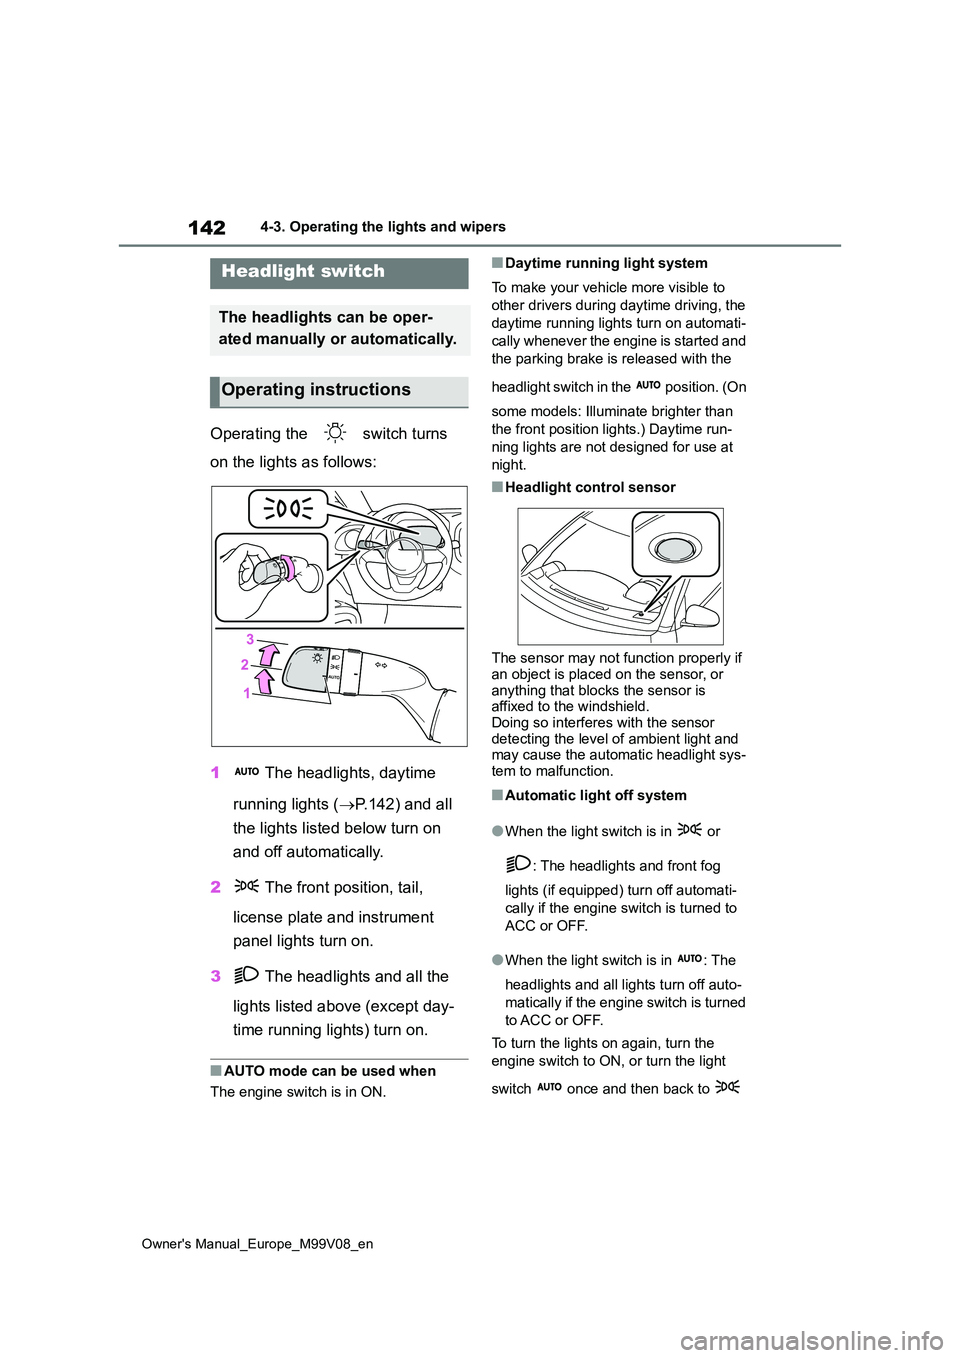 TOYOTA AYGO X 2022  Owners Manual (in English) 142
Owner's Manual_Europe_M99V08_en
4-3. Operating the lights and wipers
4-3.Operating the lights and wipers
Operating the   switch turns  
on the lights as follows: 
1  The headlights, daytime  
